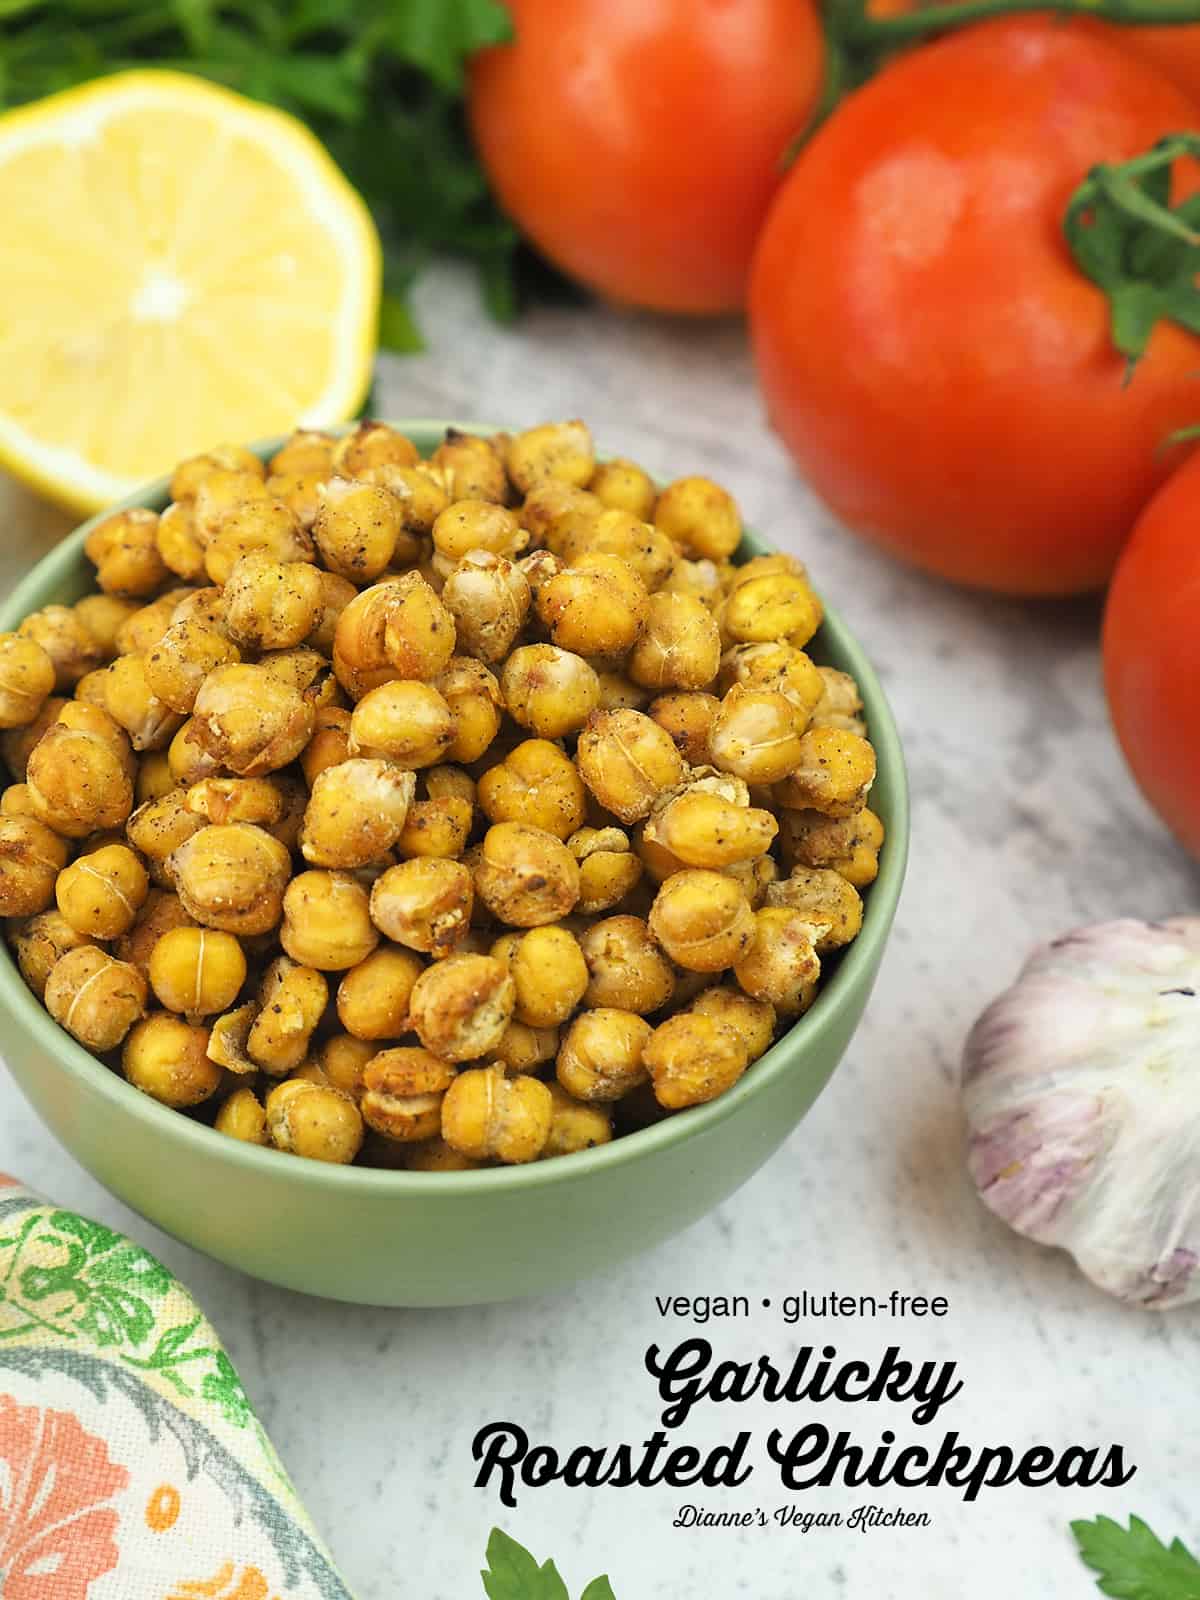 Garlicky Roasted Chickpeas with text overlay